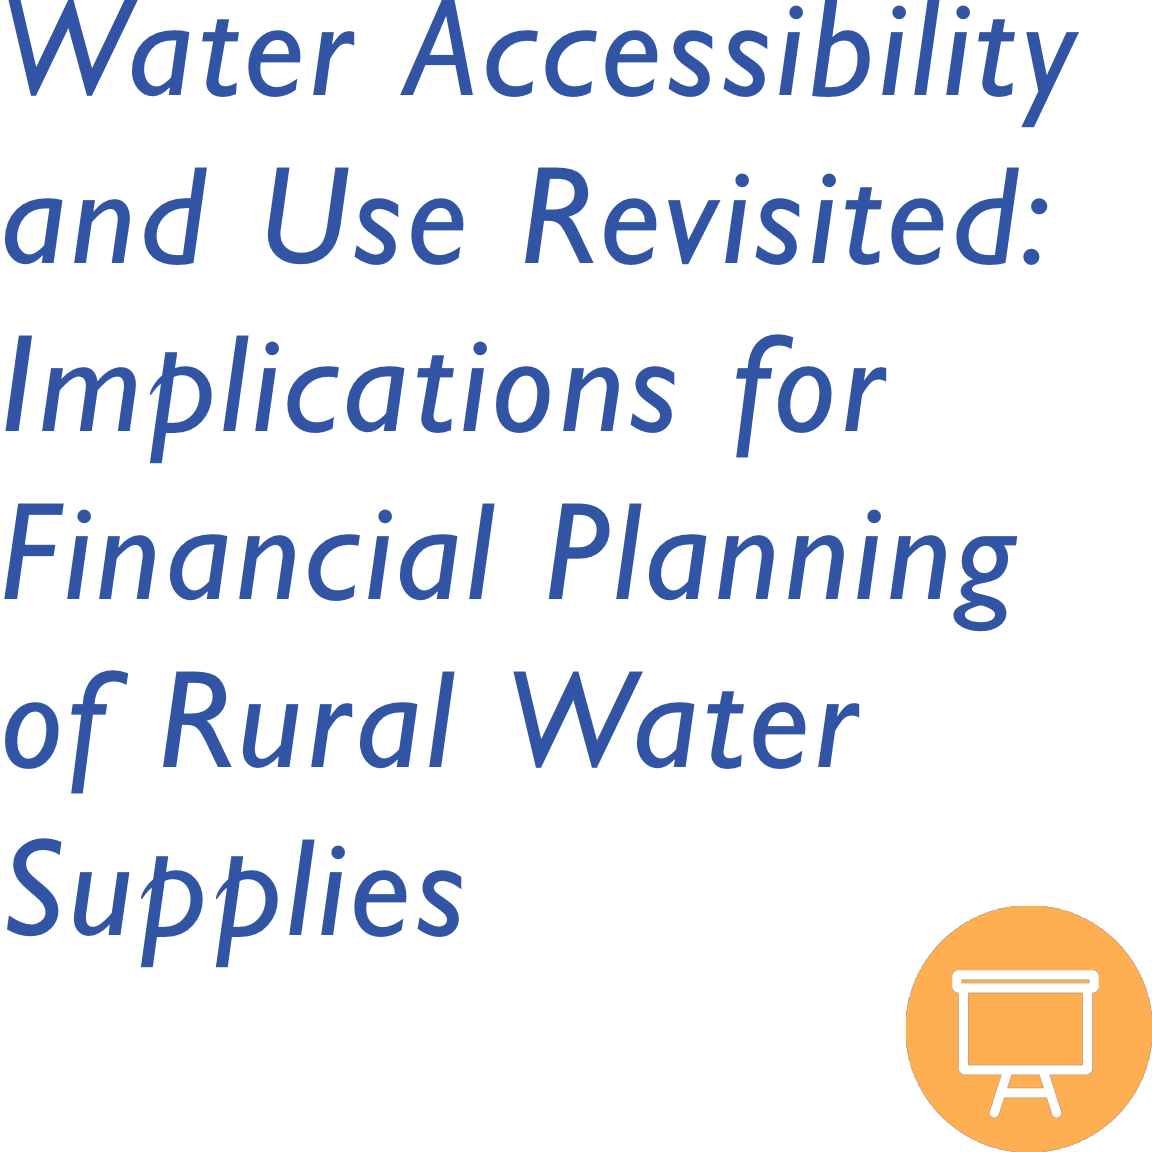 Water Accessibility and Use Revisited: Implications for Financial Planning of Rural Water Supplies